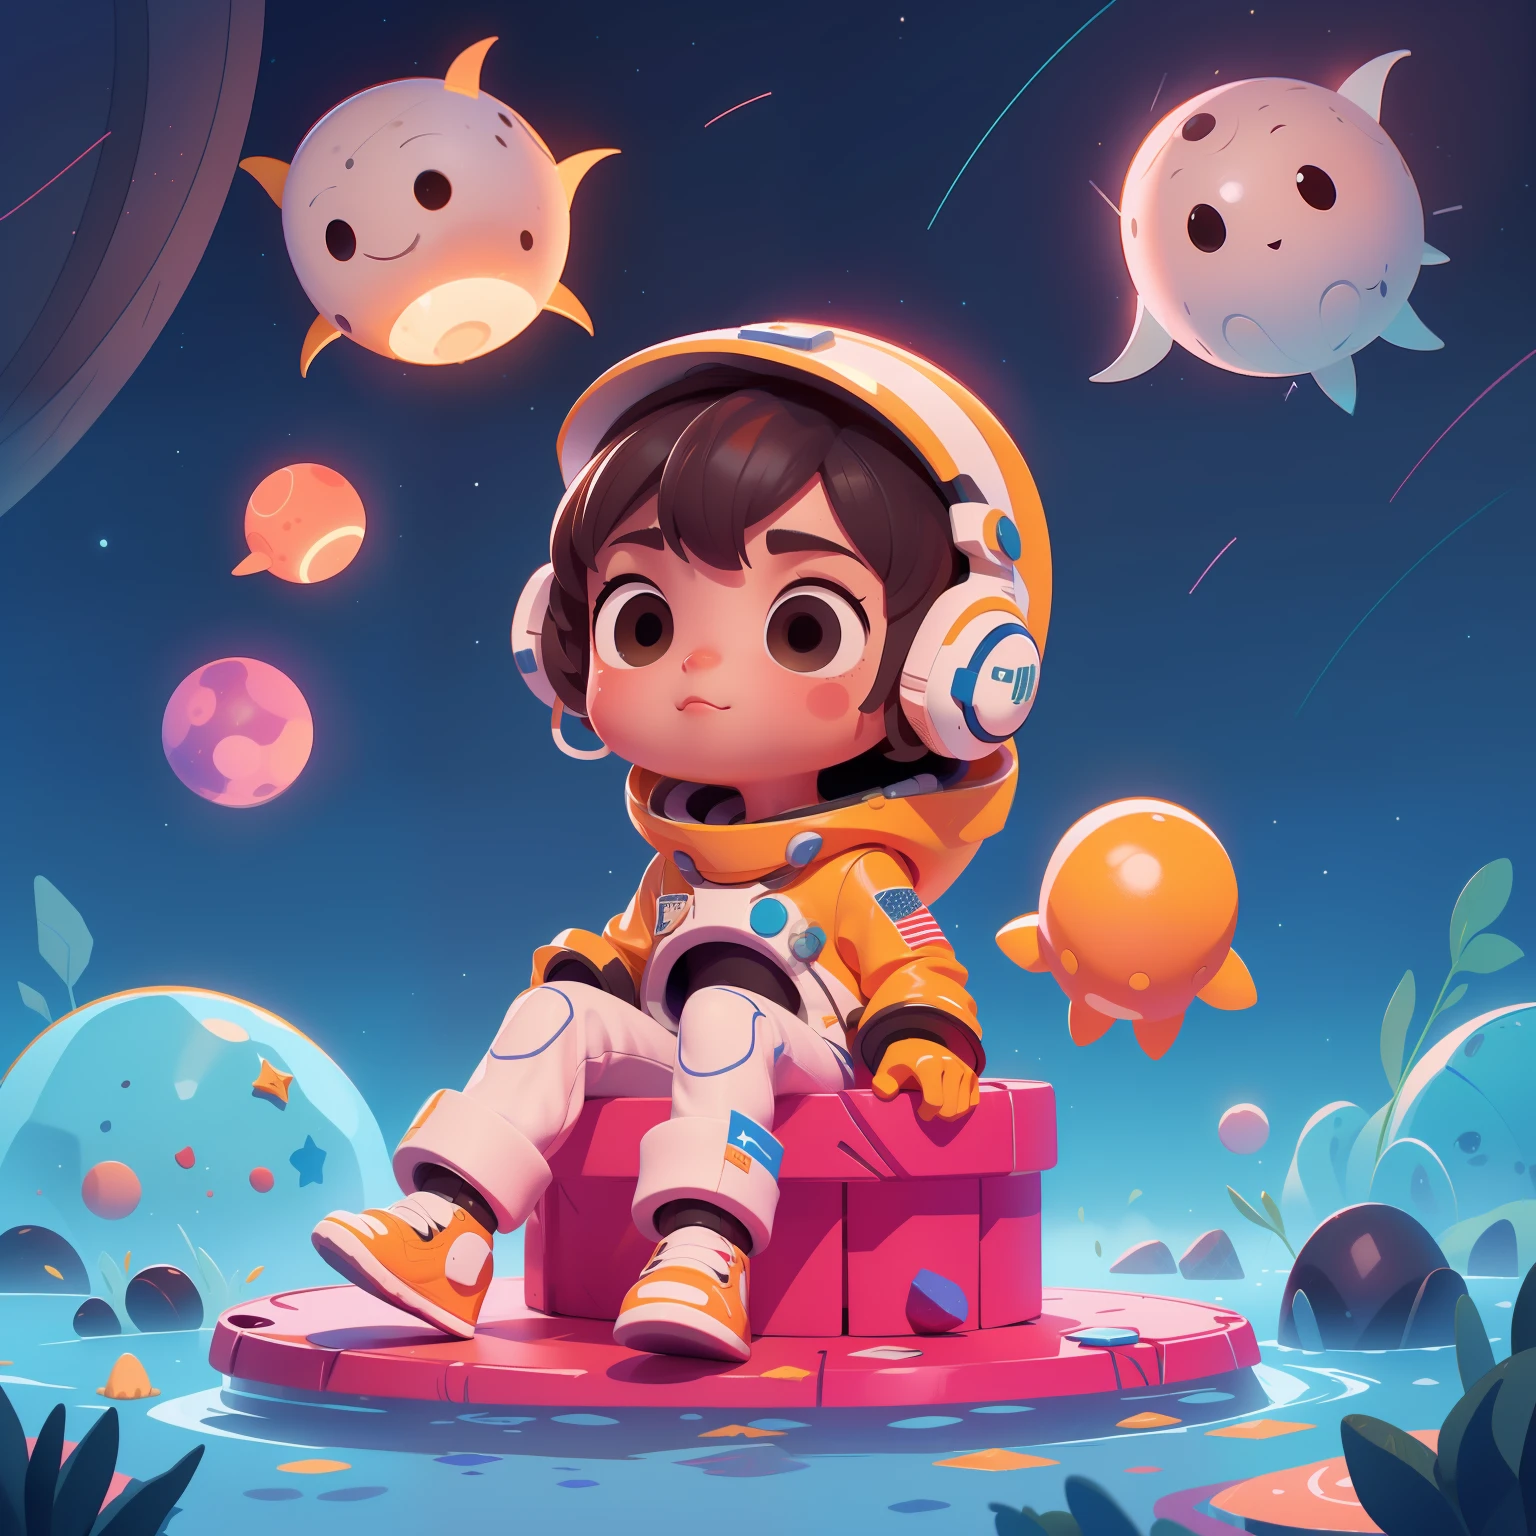 3dcharacter, vestimentas, (fully body: 1.2), simple background, Masterpiece artwork, best qualityer, (gradient background: 1.1), 1man, Draw a young astronaut, white space suit helmet with visor, sitting on a research platform floating in the middle of a belt of asteroids and stars